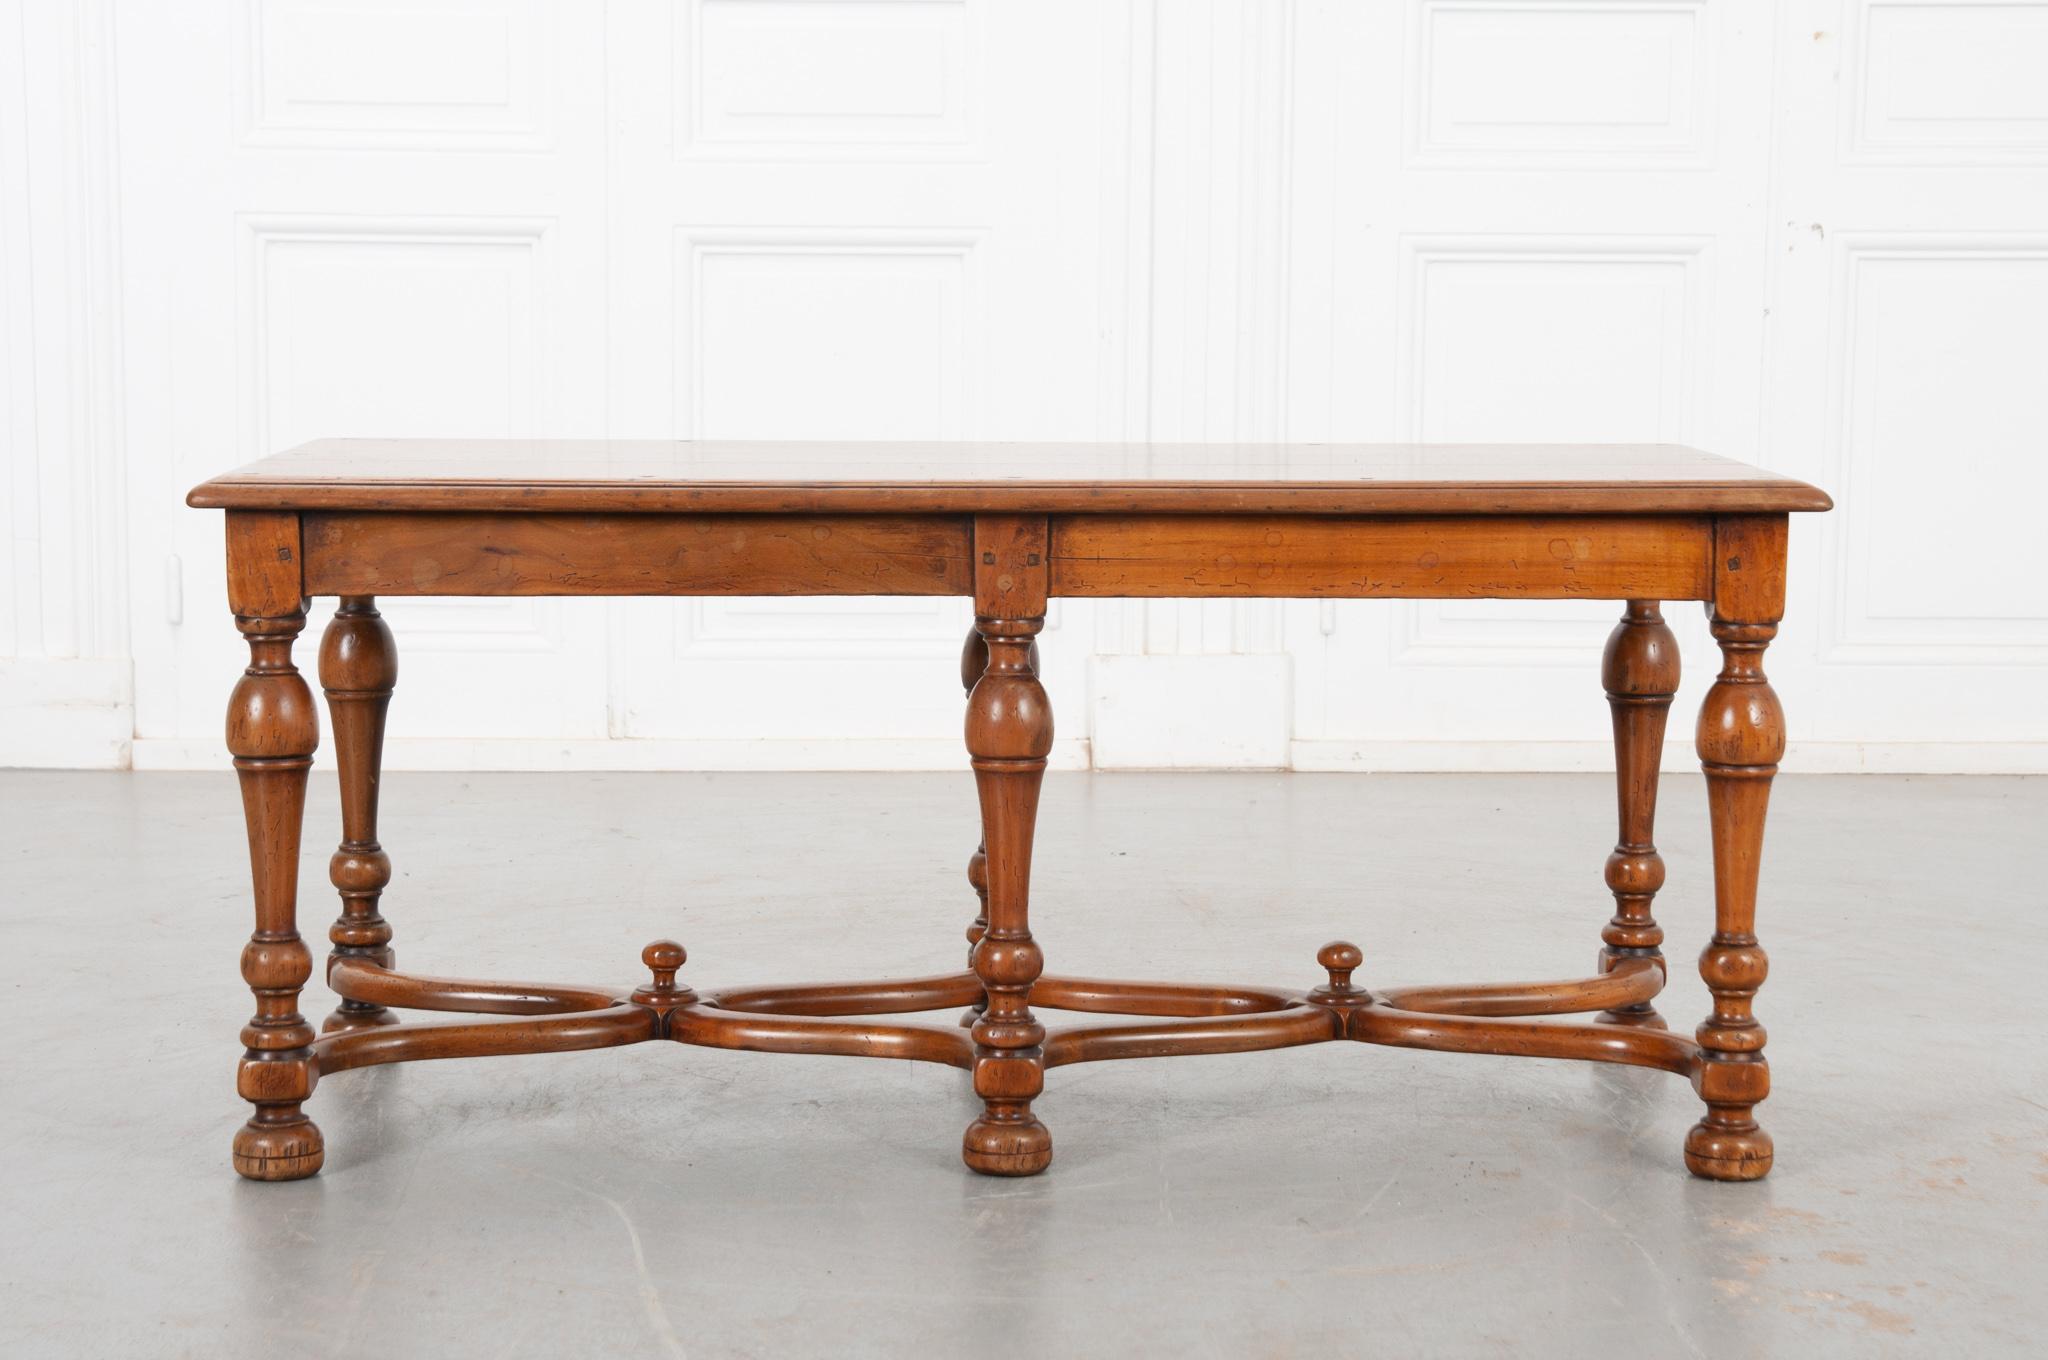 A beautiful French fruitwood low table, made in the early 1900s, featuring expertly turned legs and curved stretcher details. Vibrant and wonderfully patinated. This fantastic little table would make the perfect coffee or cocktail table, but could